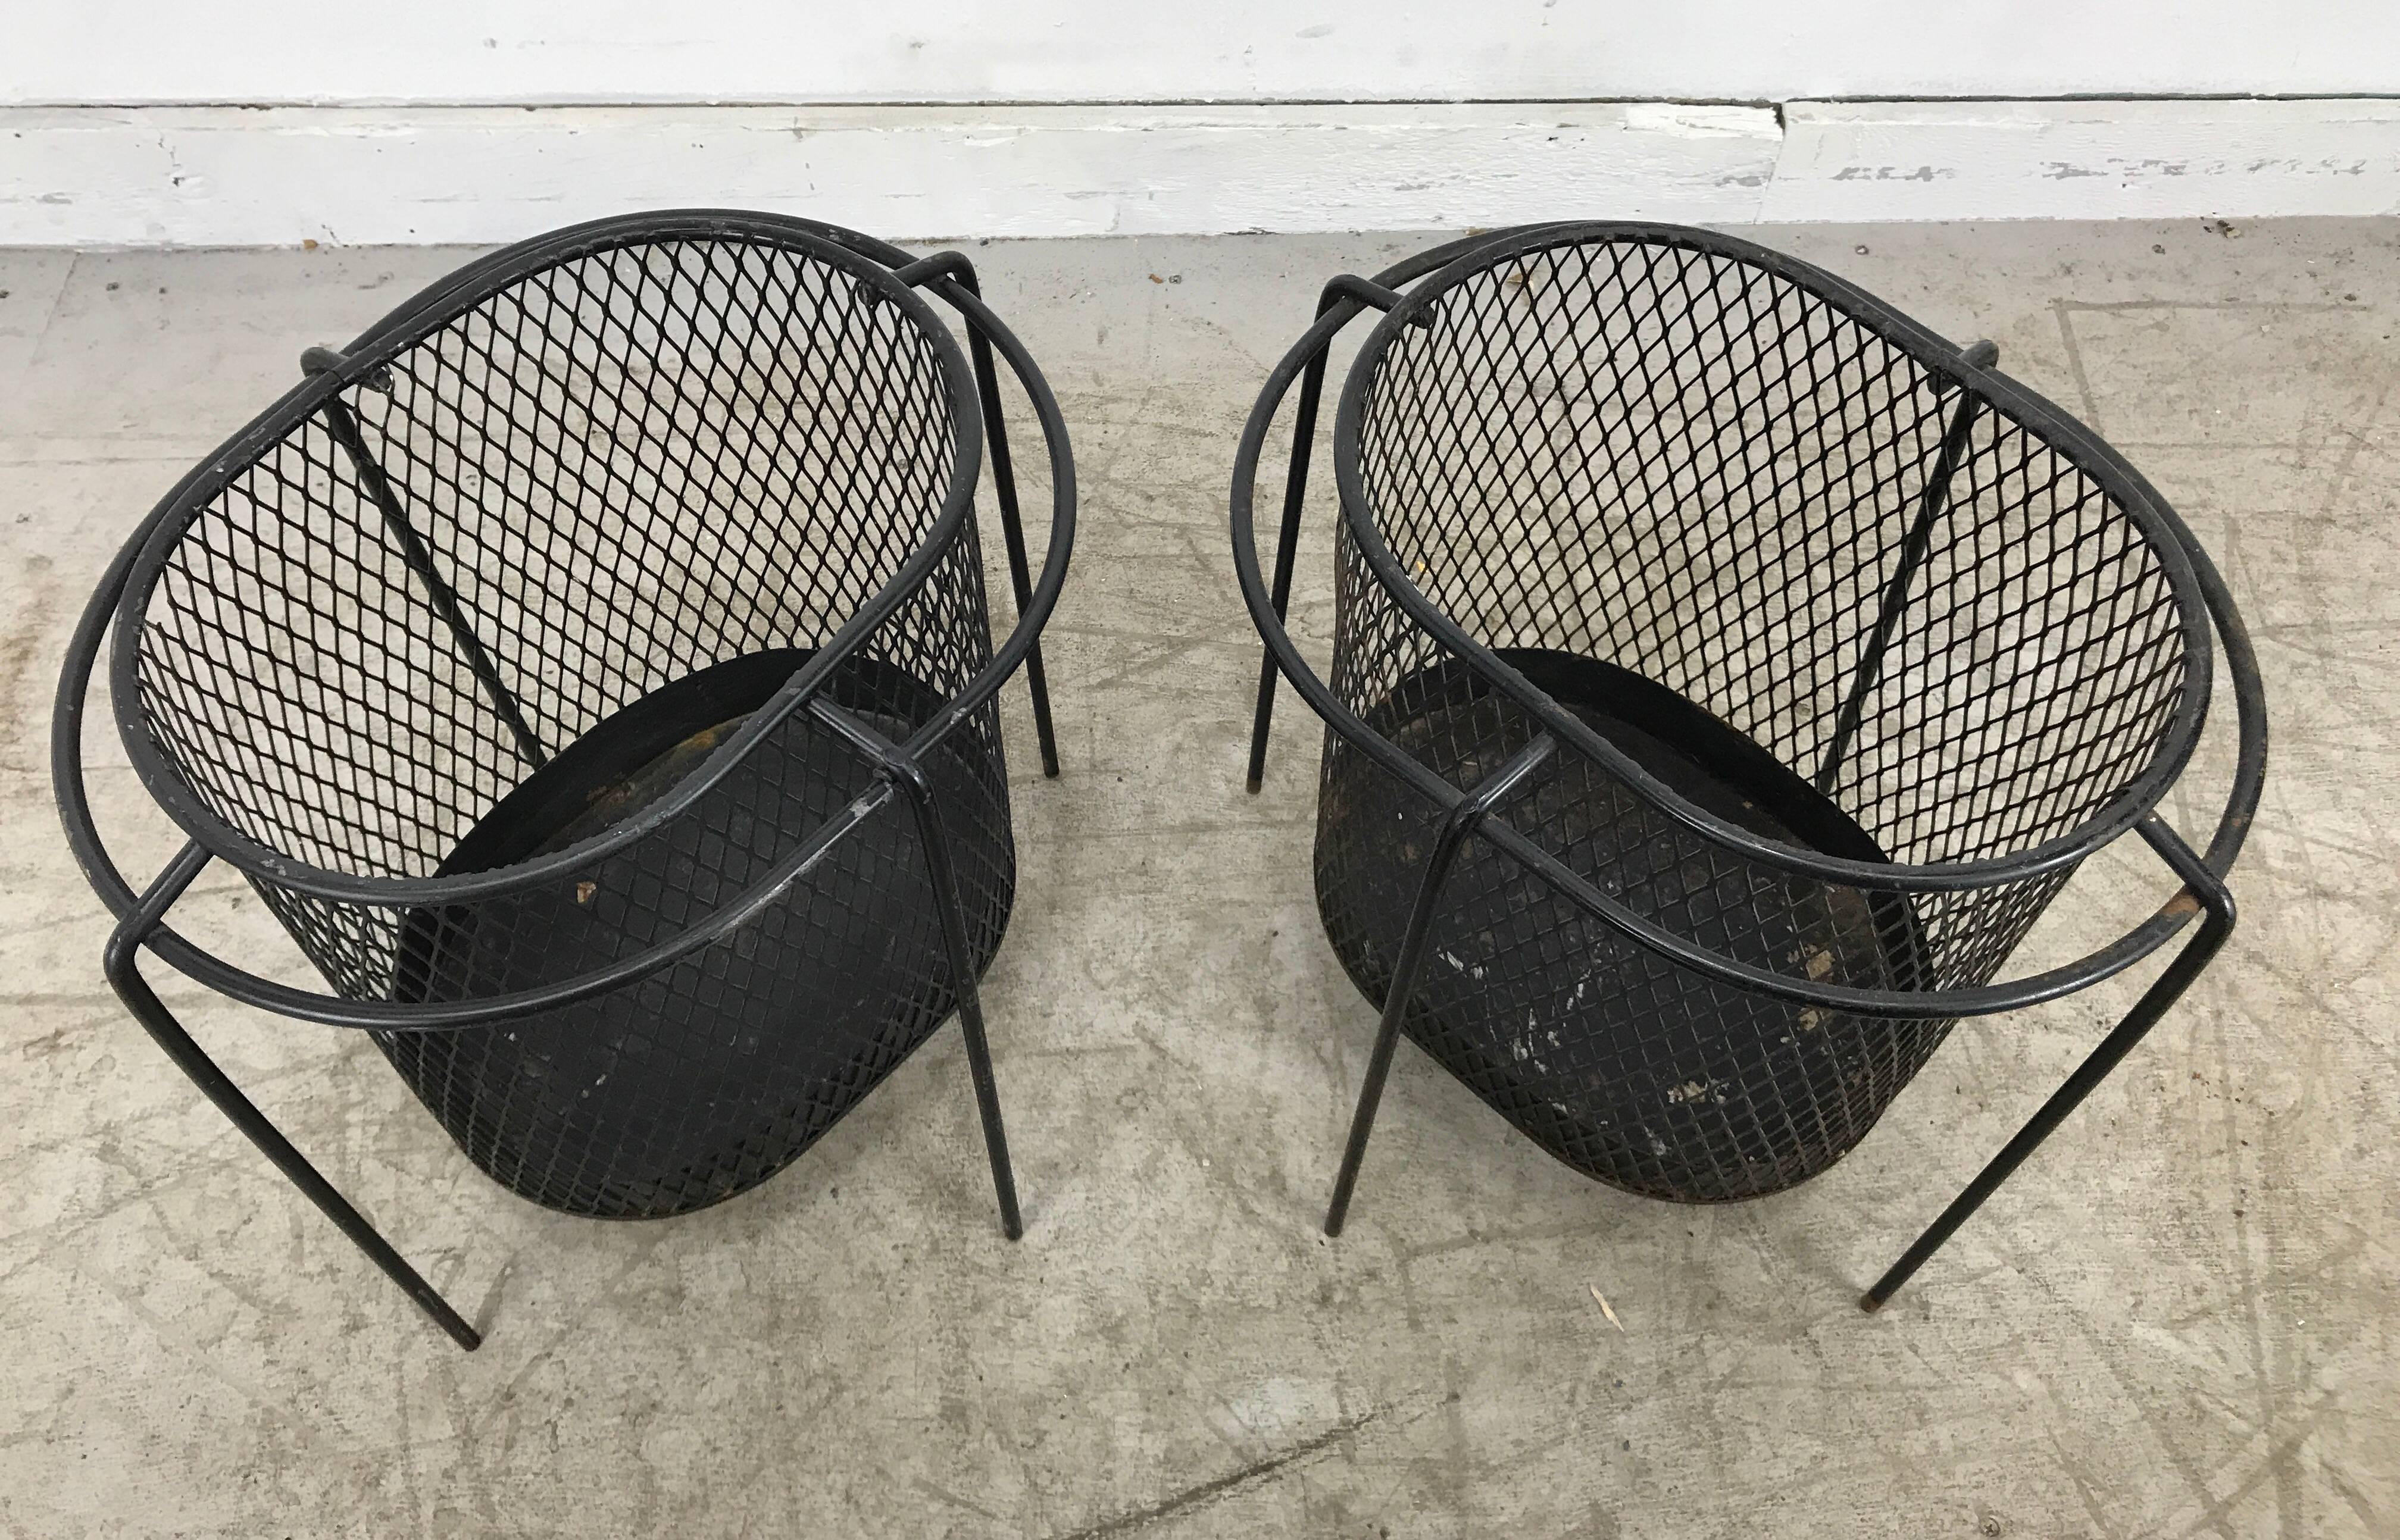 American Elusive Pair of Wire Iron Modernist Waste Baskets by Maurice Ducin, circa 1953